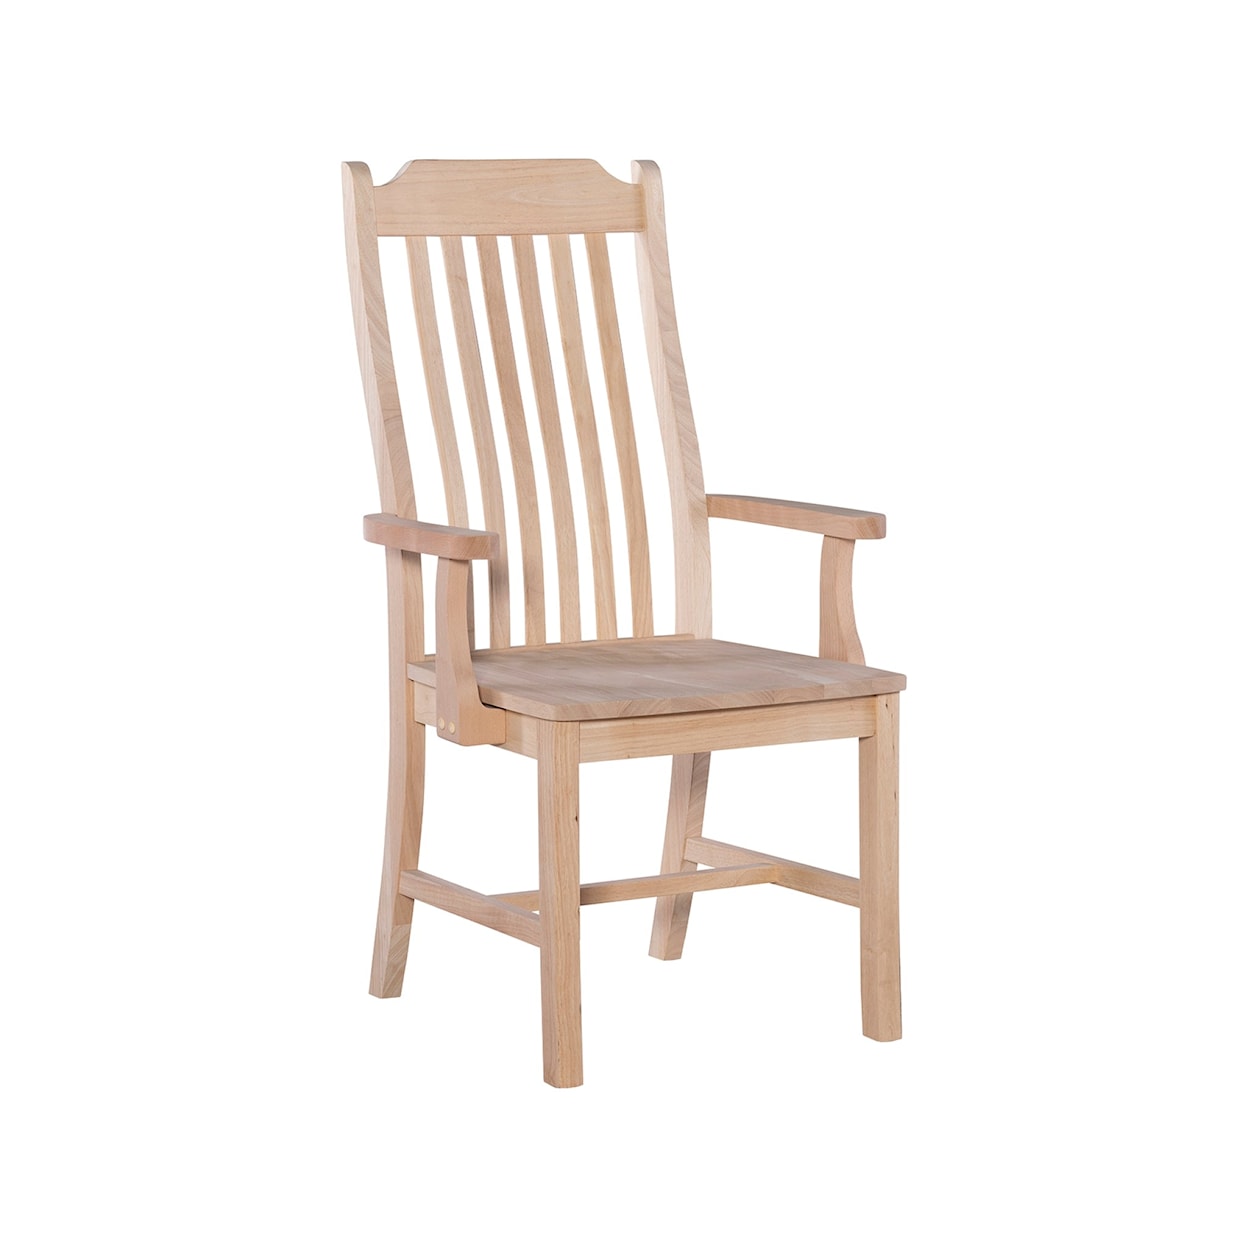 John Thomas SELECT Dining Room Steambent Mission Arm Chair